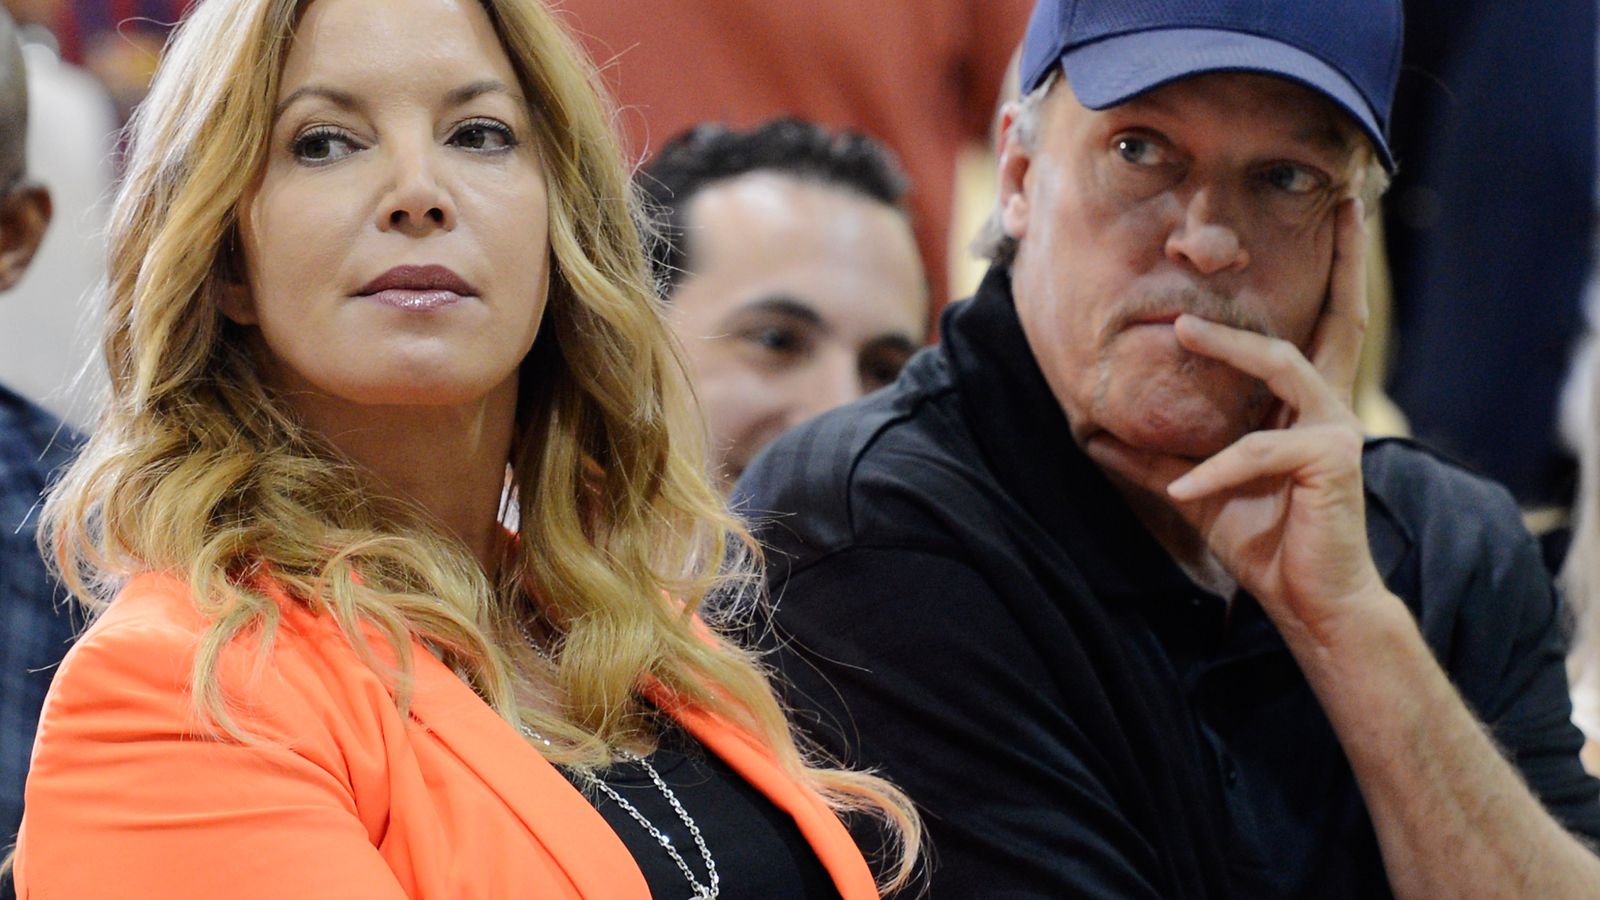 Jeanie Buss has stripped Jim Buss of all his power with the Lakers.